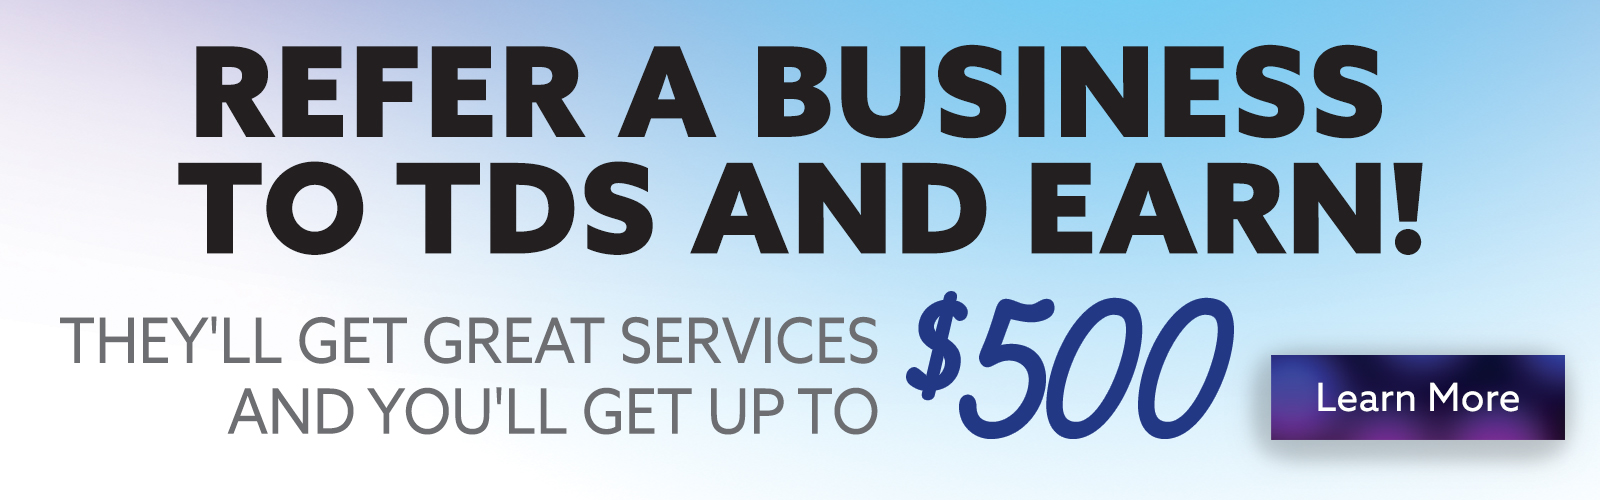 Refer a business and earn up to $500.